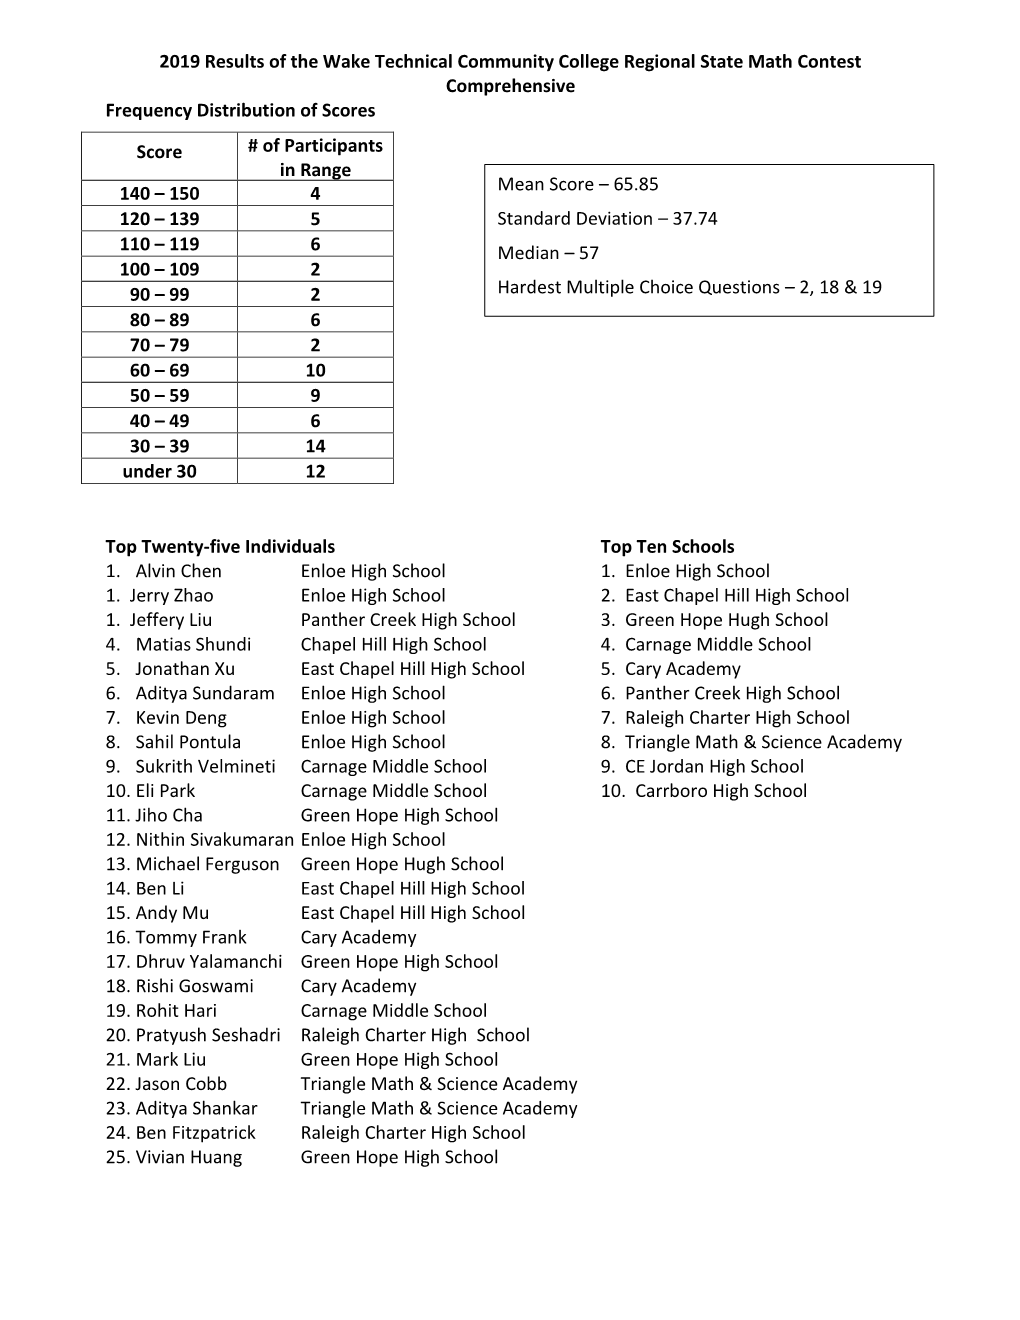 2019 Results of the Wake Technical Community College Regional State Math Contest Comprehensive Frequency Distribution of Scores